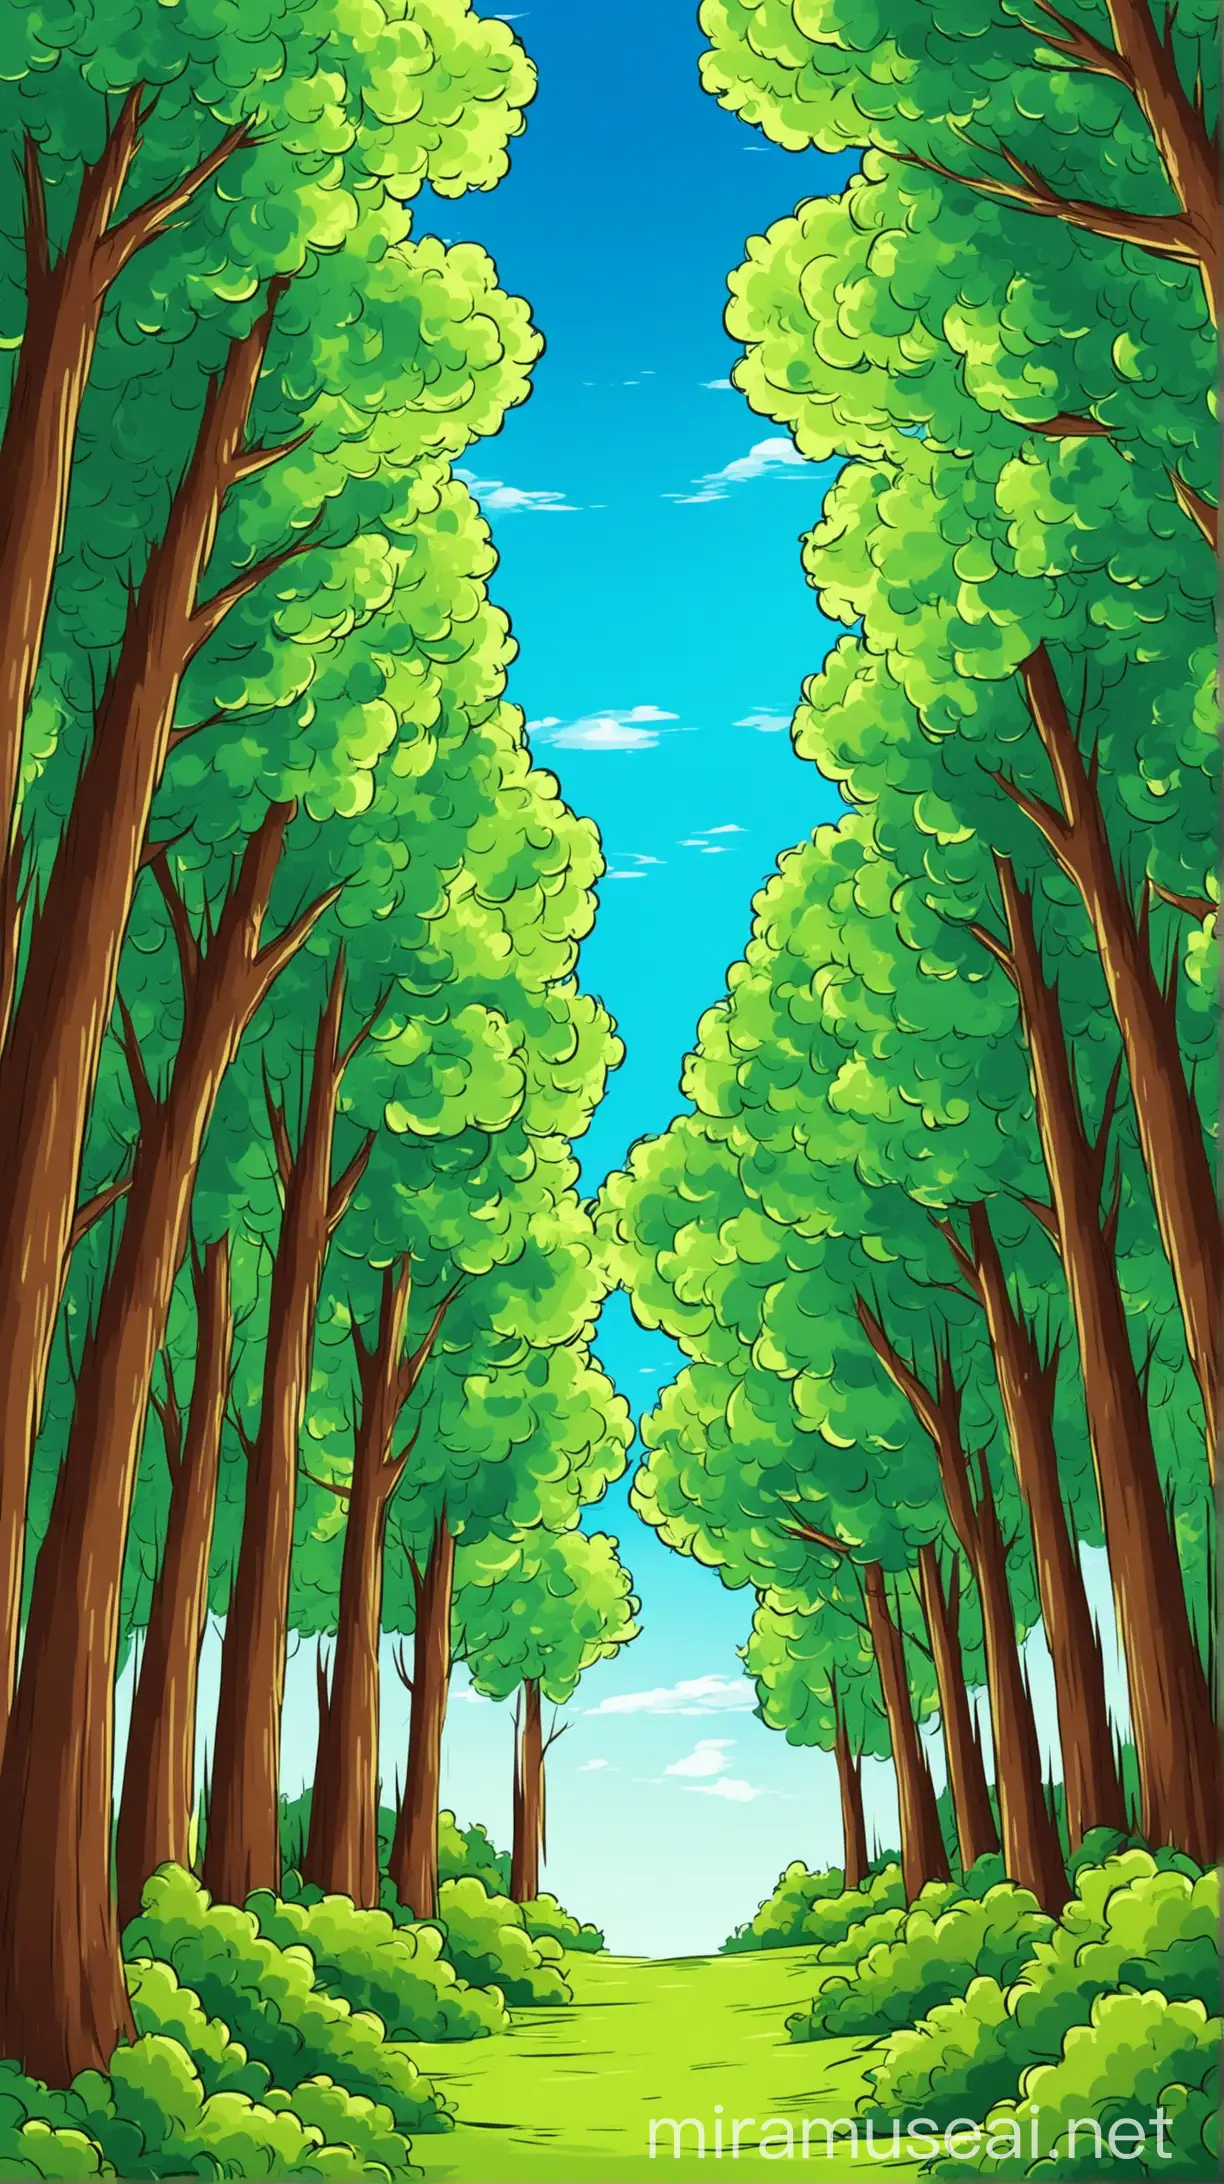 forest with trees and blue sky backgrounds cartoonish